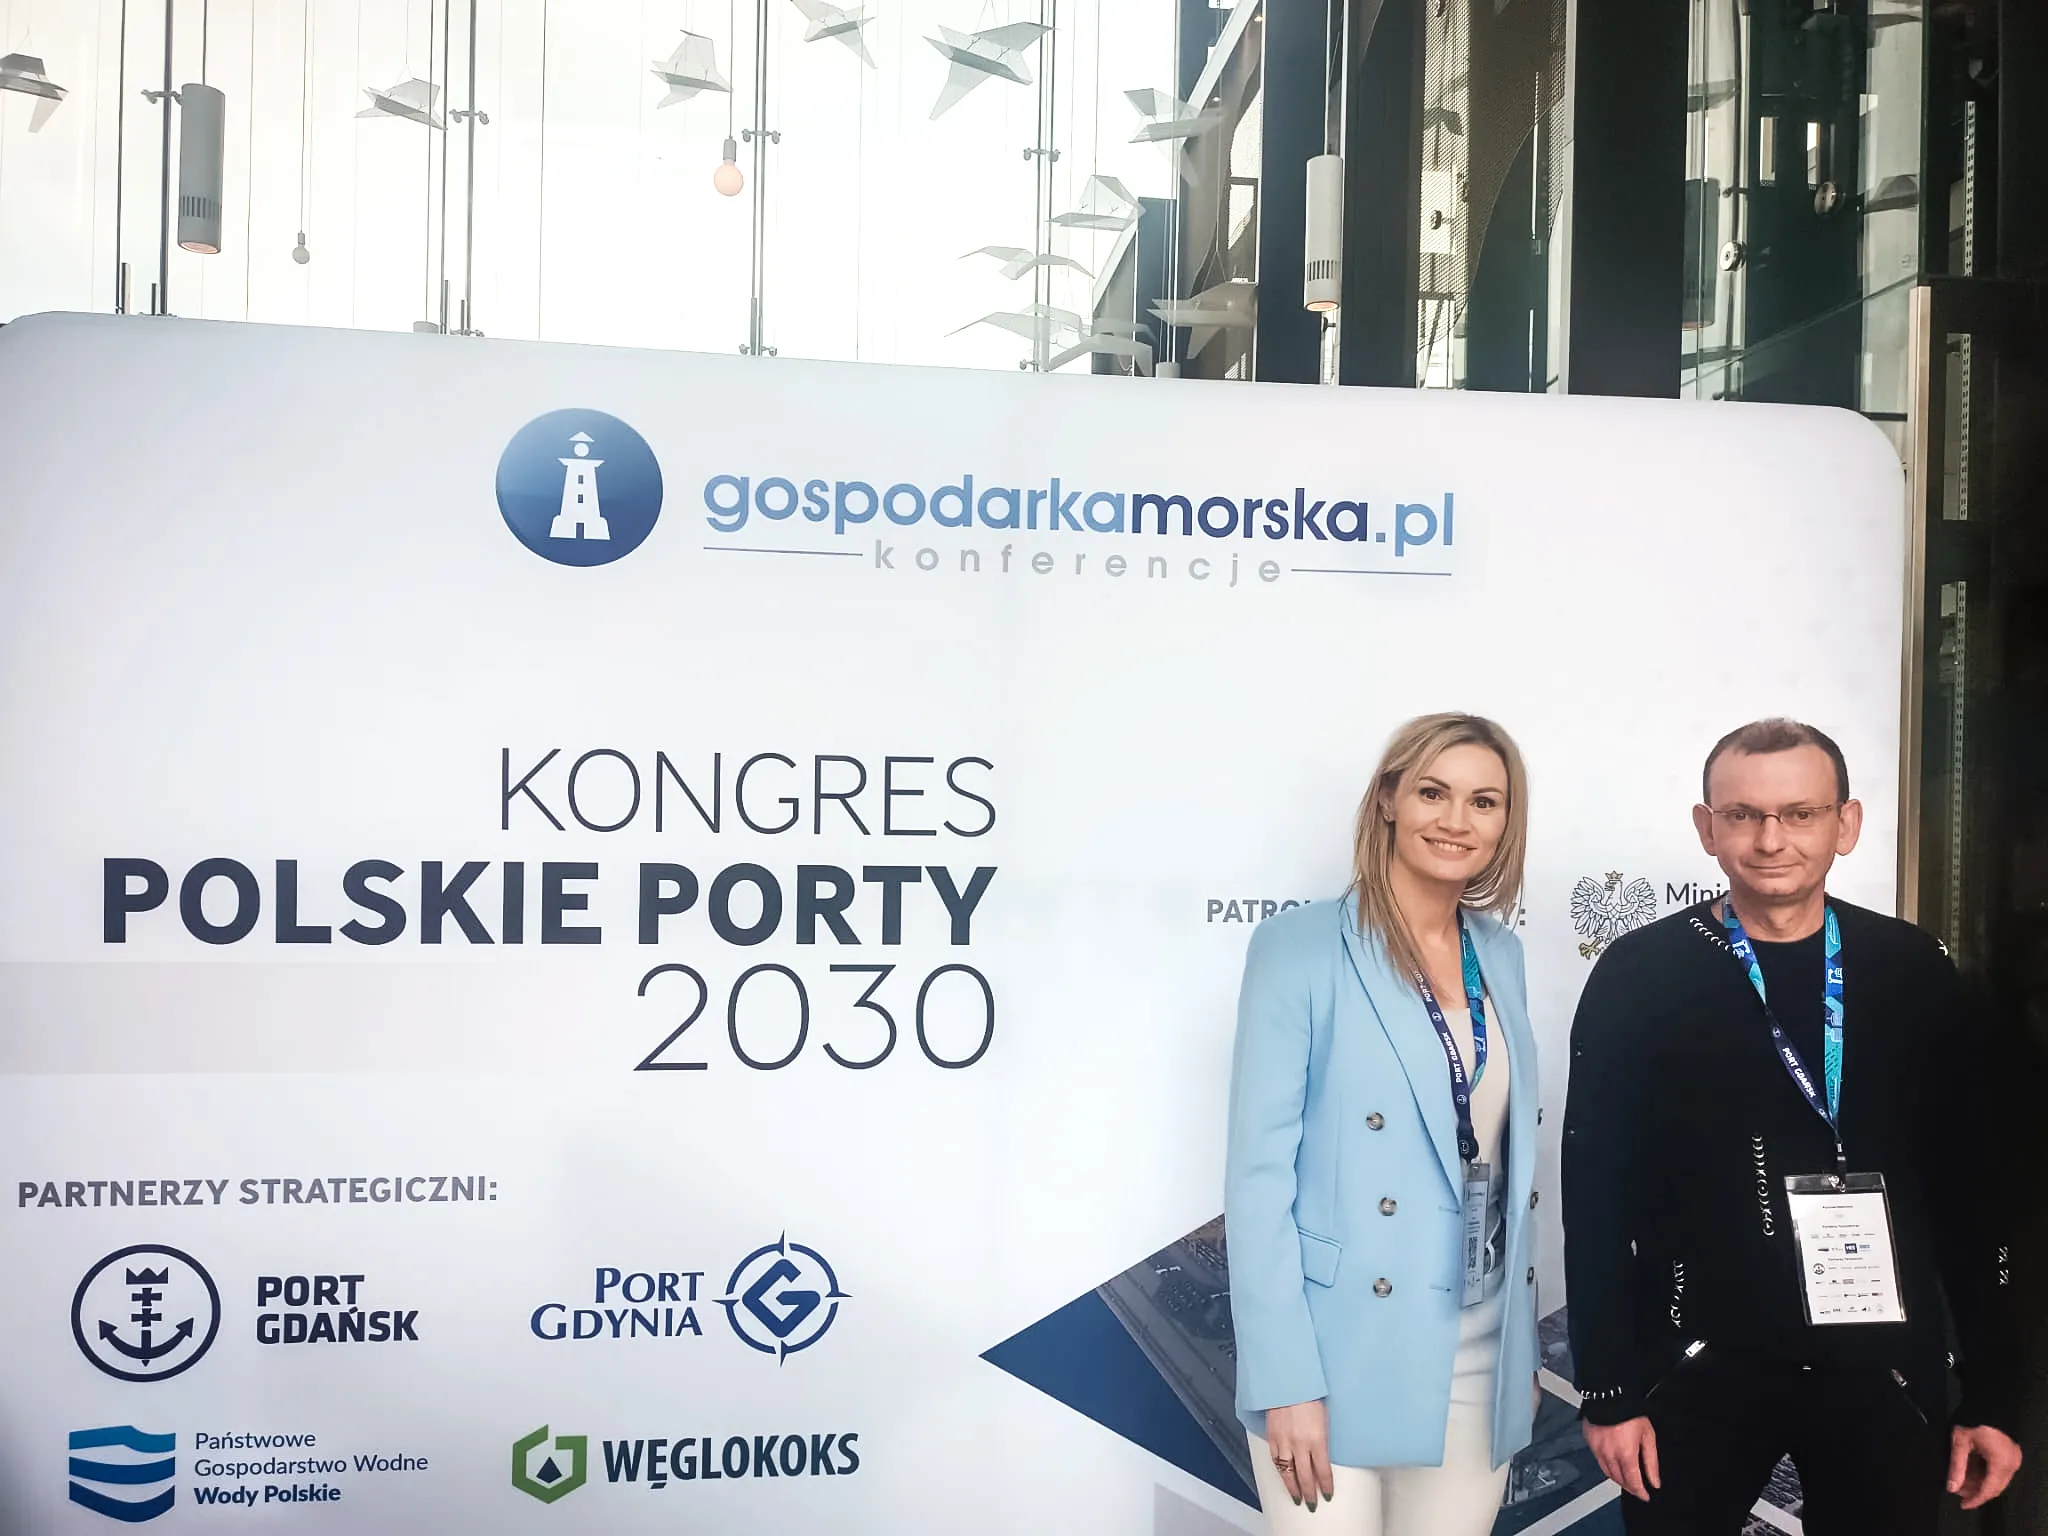 Glass-Link representation at the event in Poland - Polskie Porty 2030